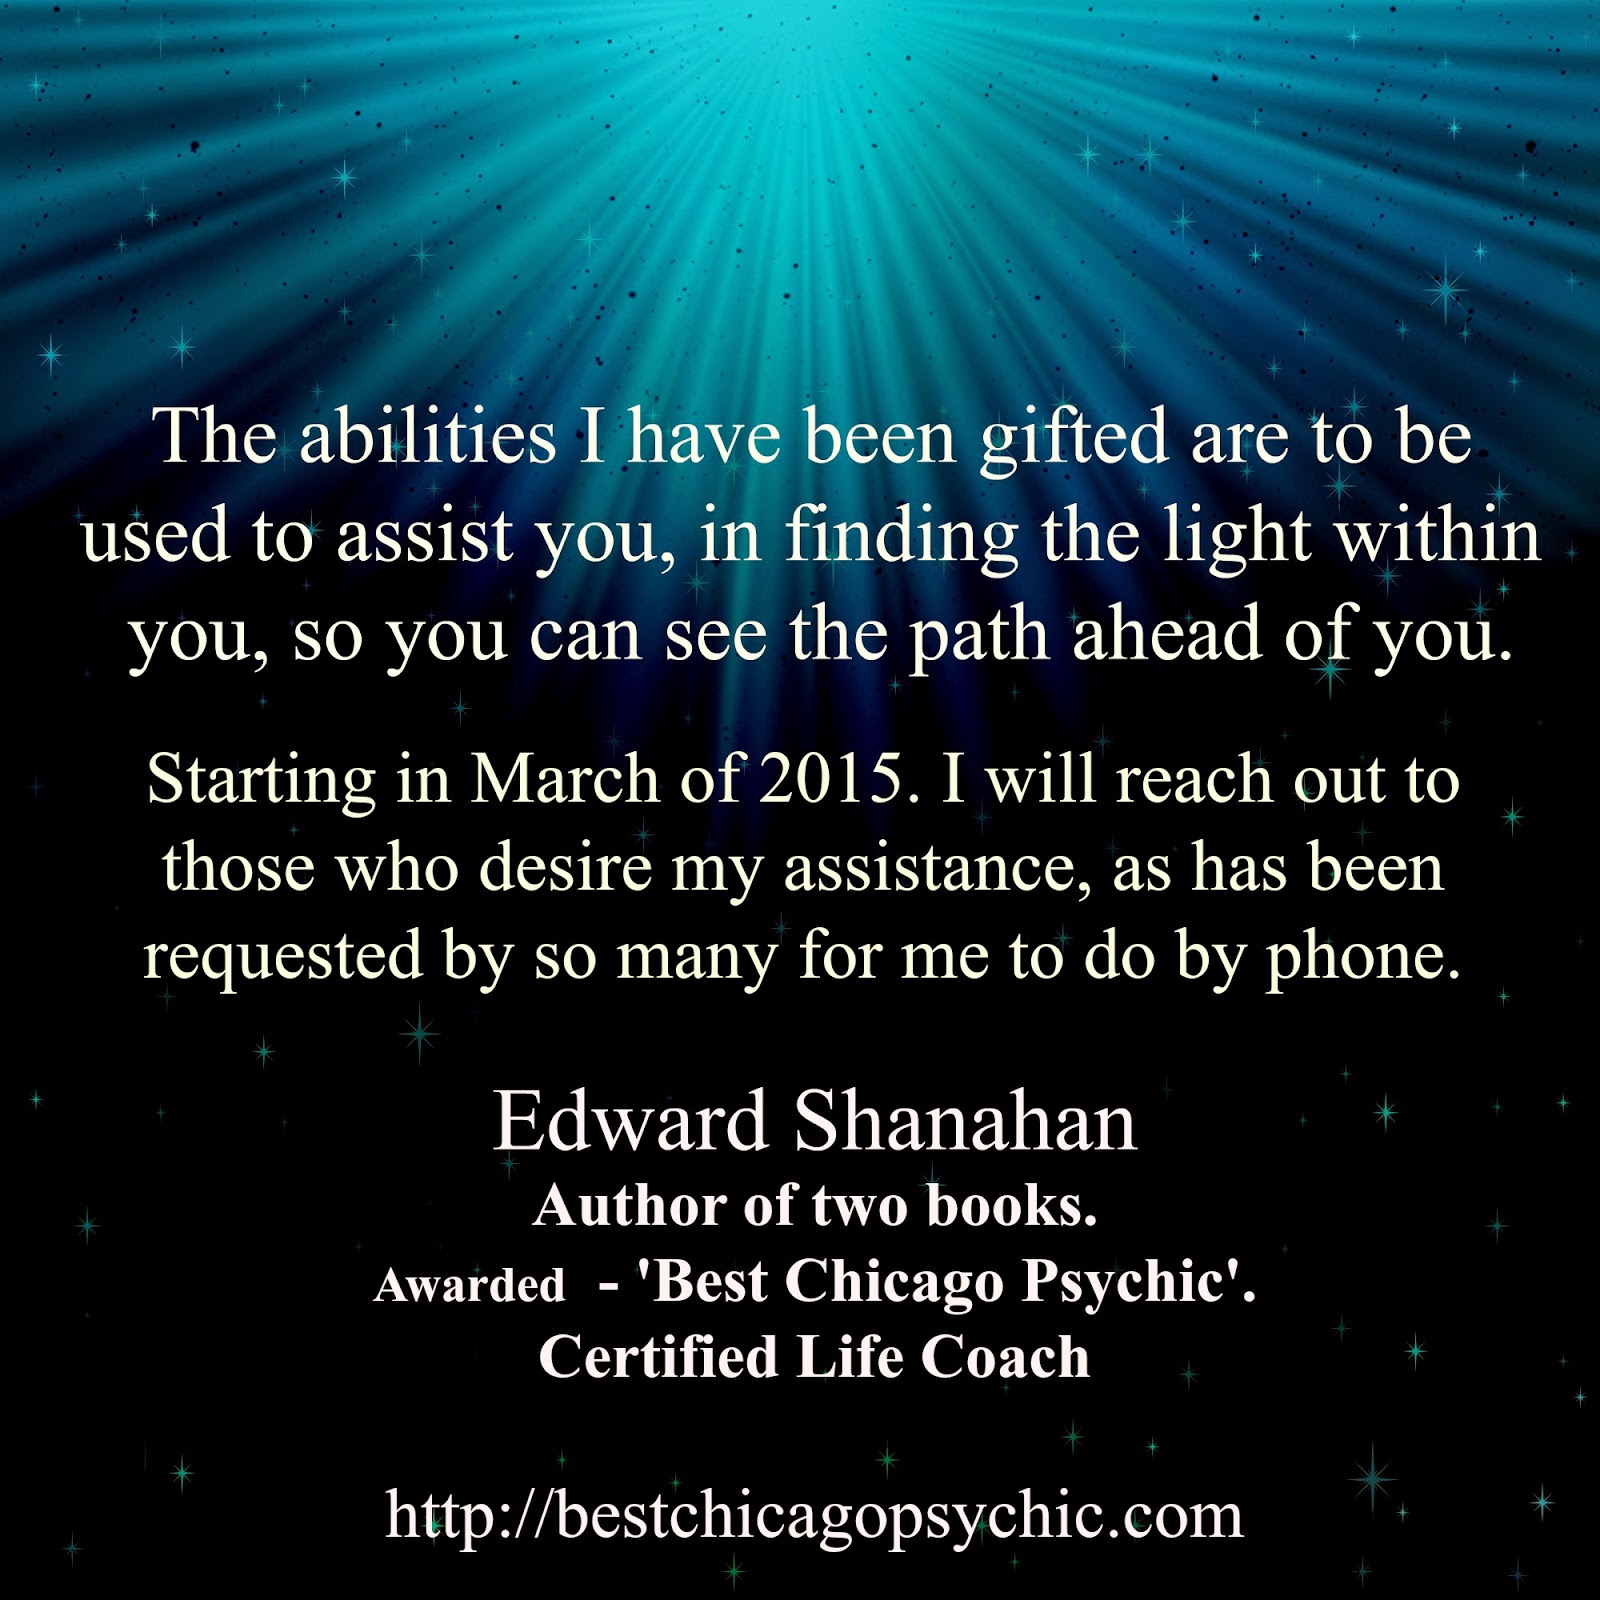 Best Psychic in Chicago award winner offers Psychic Phone Readings.